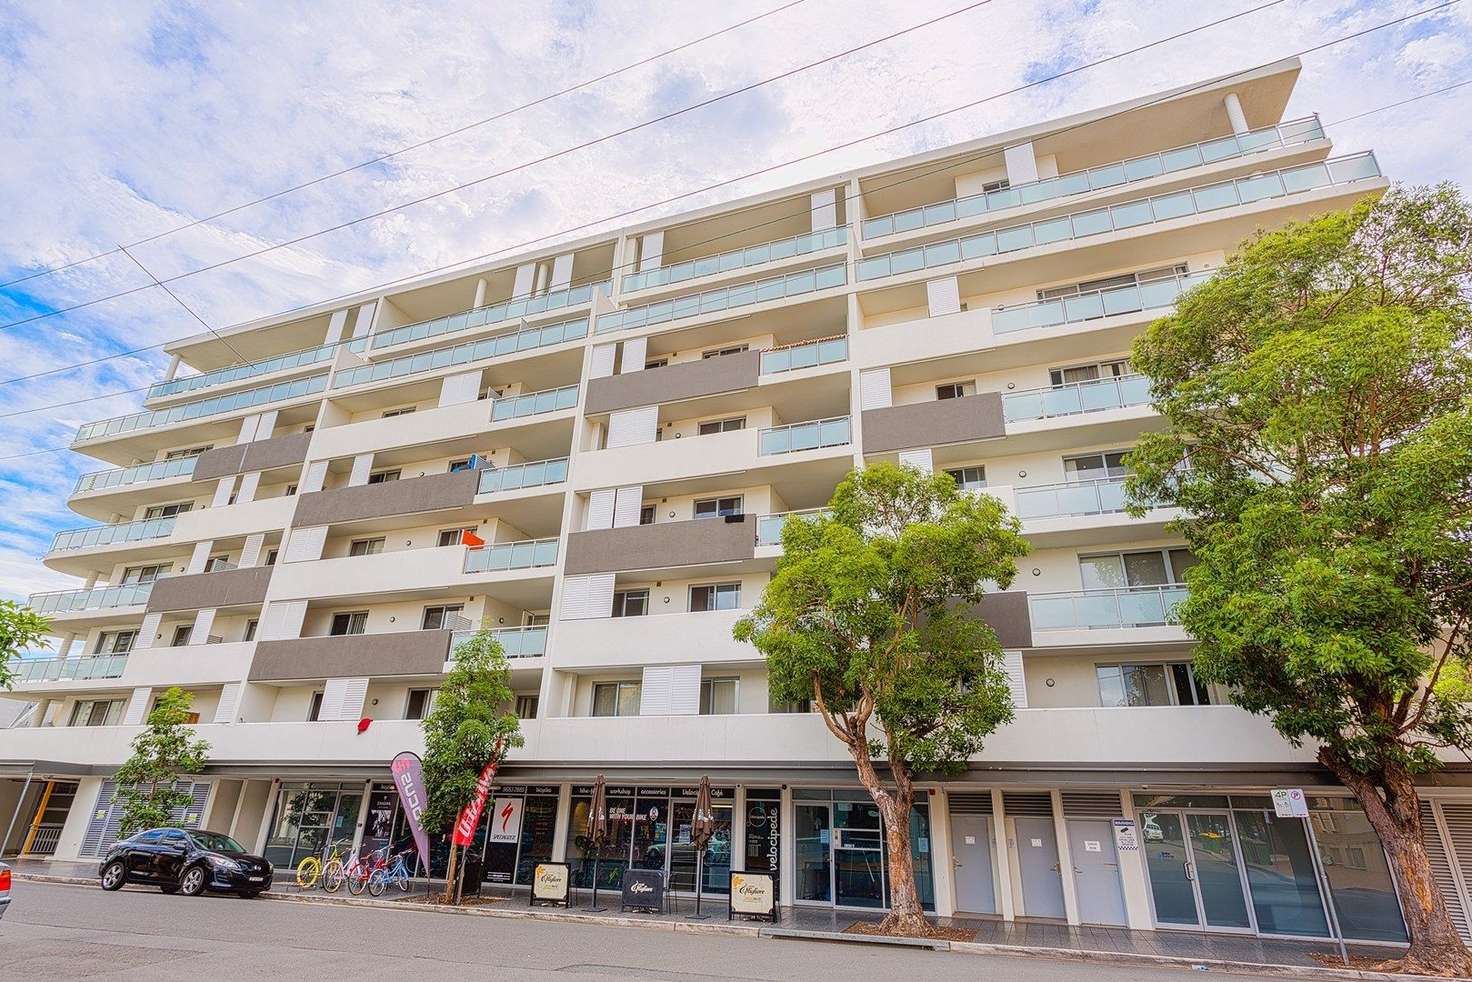 Main view of Homely apartment listing, 32a/20-24 Sorrell Street, Parramatta NSW 2150